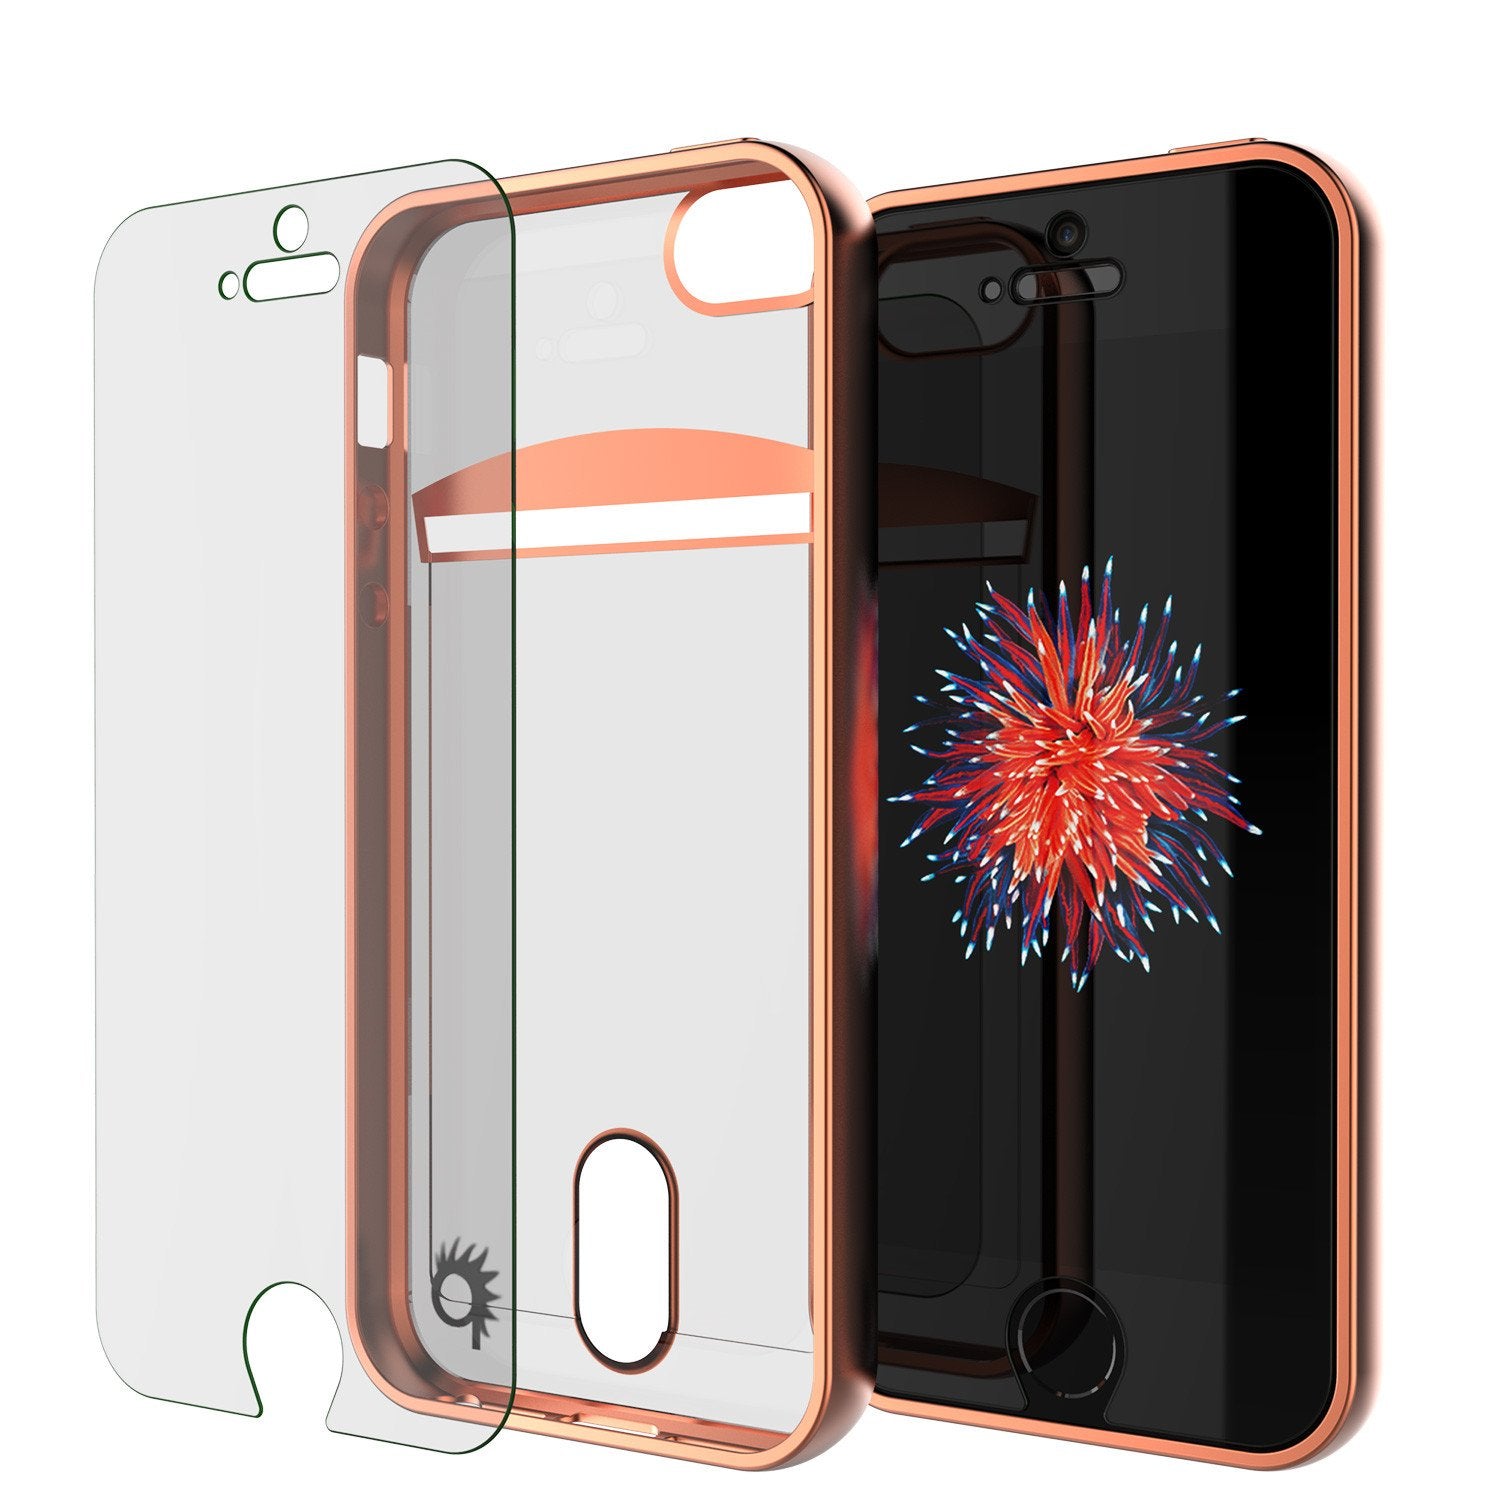 iPhone SE/5S/5 Case, PUNKCASE® LUCID Rose Gold Series | Card Slot | Screen Protector | Ultra fit